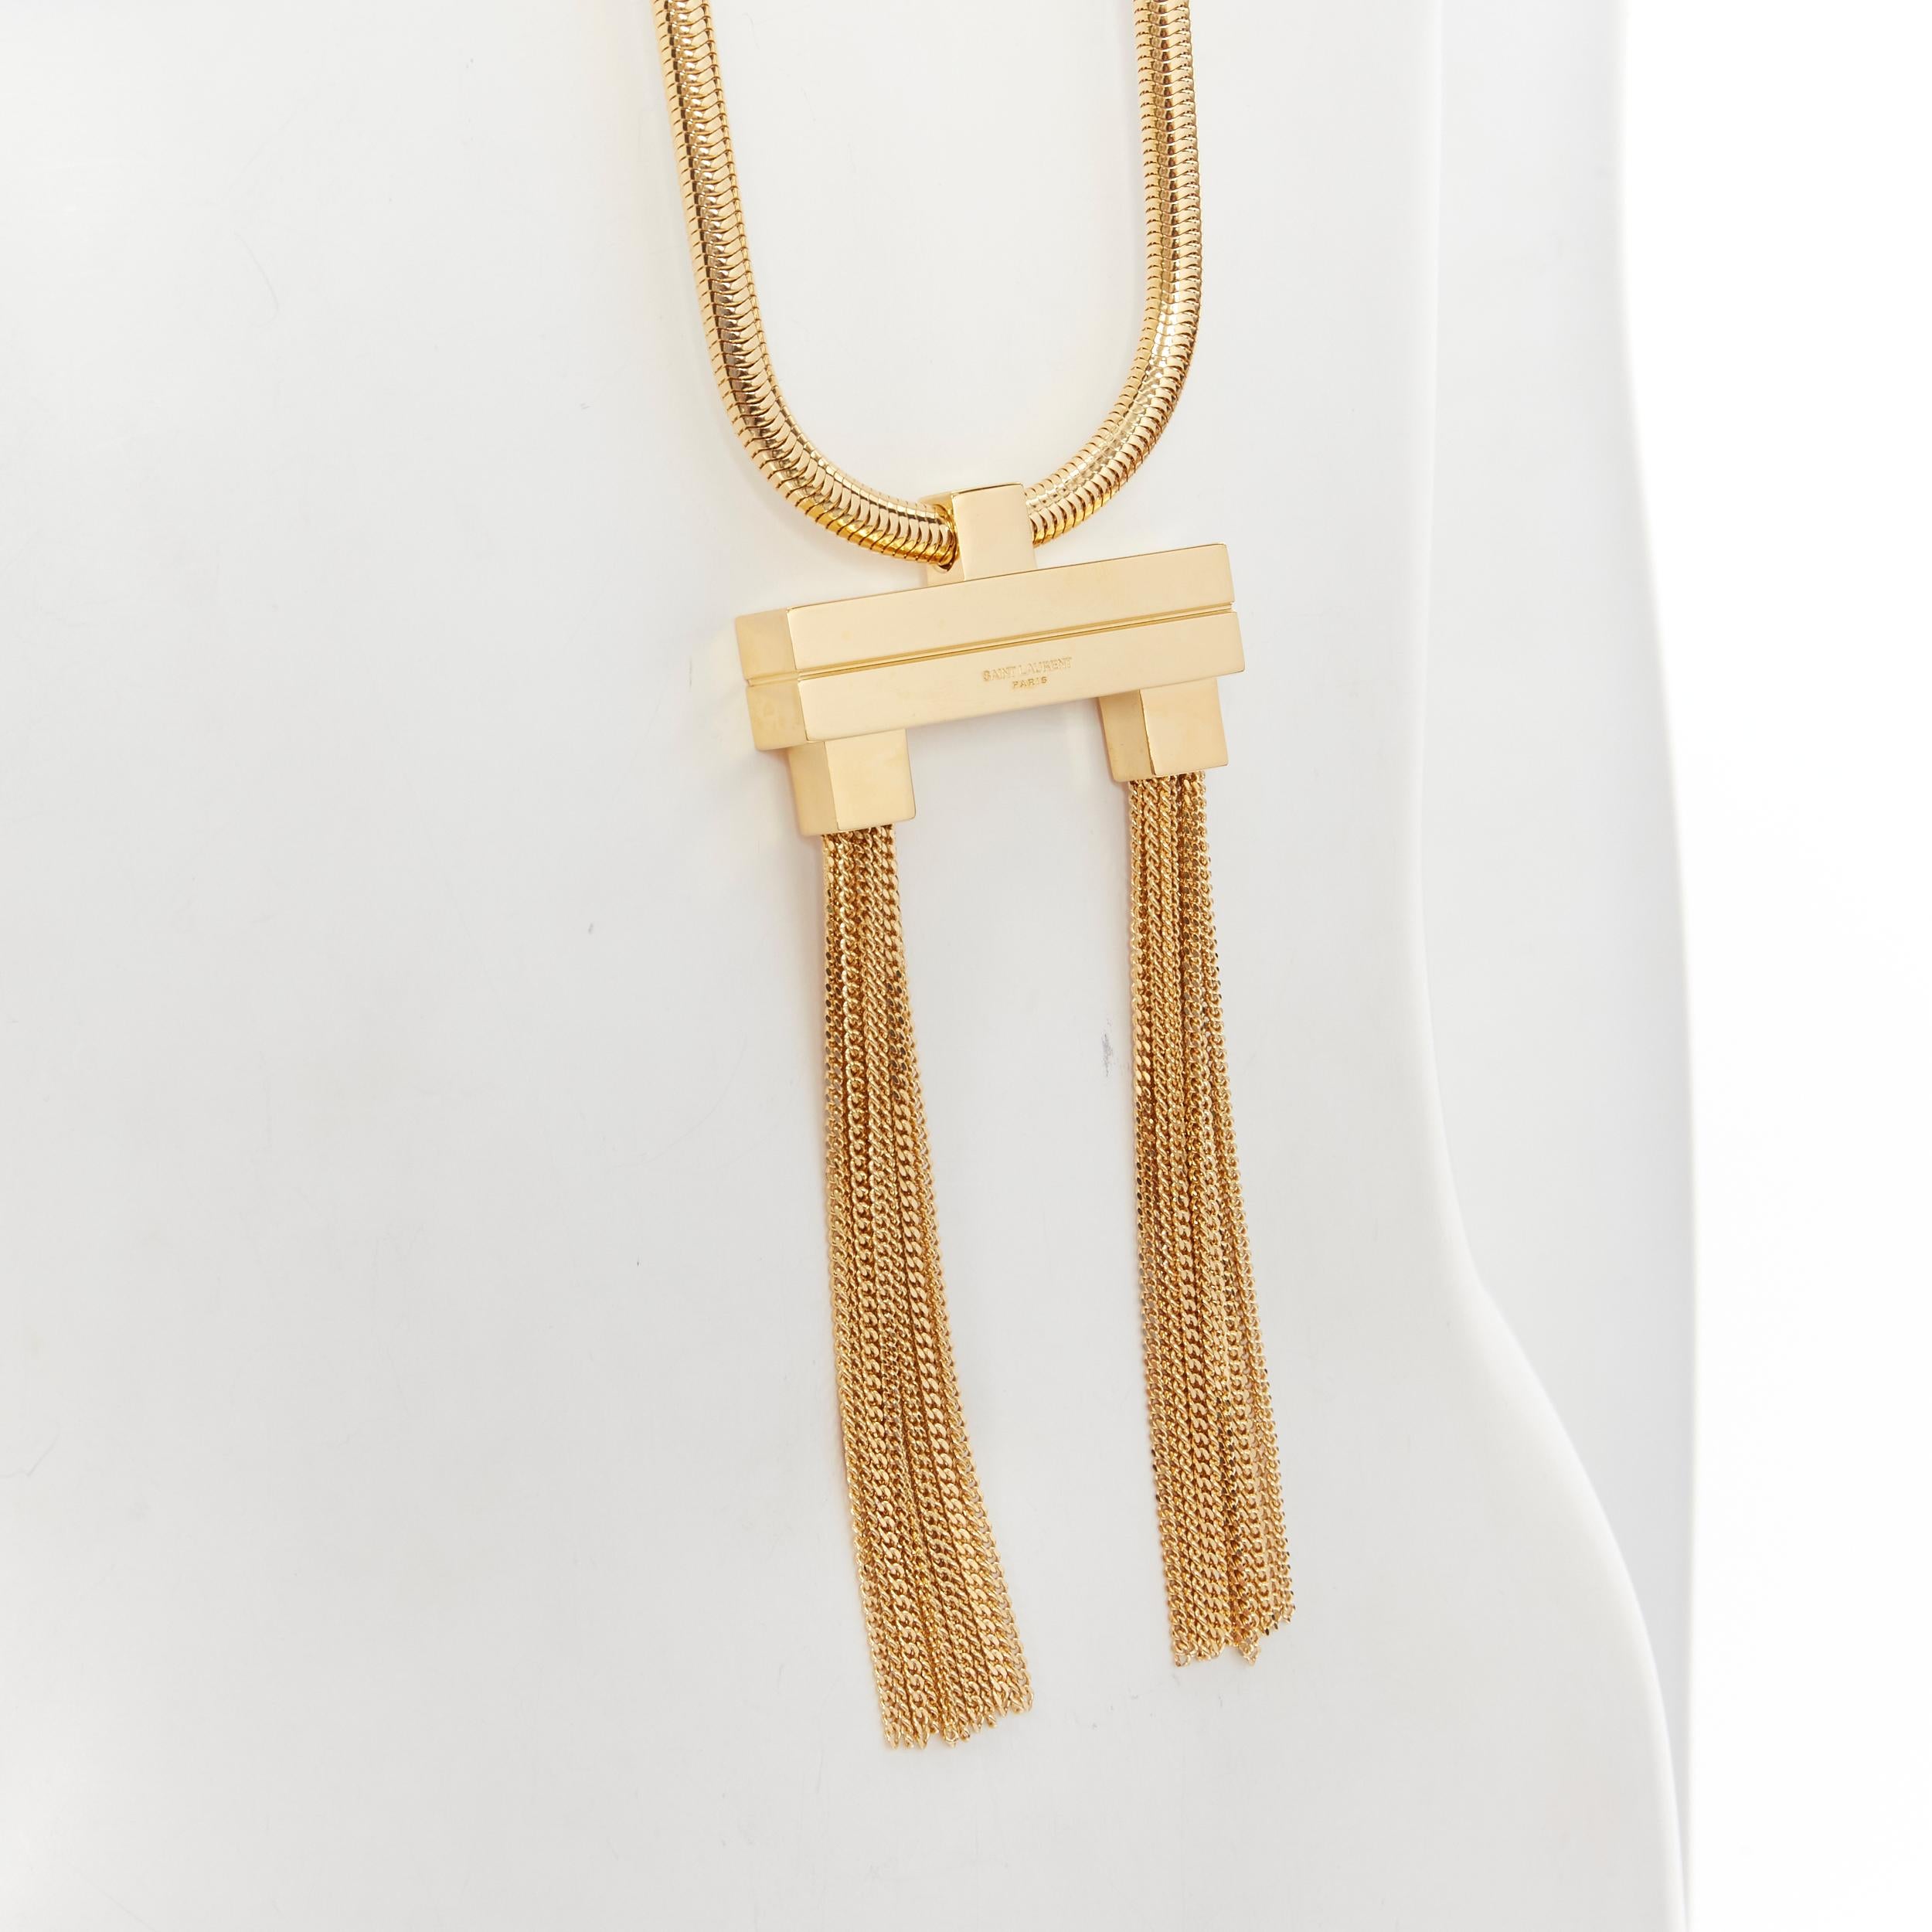 new SAINT LAURENT Hedi Slimane 2013 Runway Opium gold double tassel necklace 
Reference: TGAS/B01804 
Brand: Saint Laurent 
Designer: Hedi Slimane 
Collection: 2013 Runway 
Material: Metal 
Color: Gold 
Pattern: Solid 
Closure: Clasp 
Extra Detail: